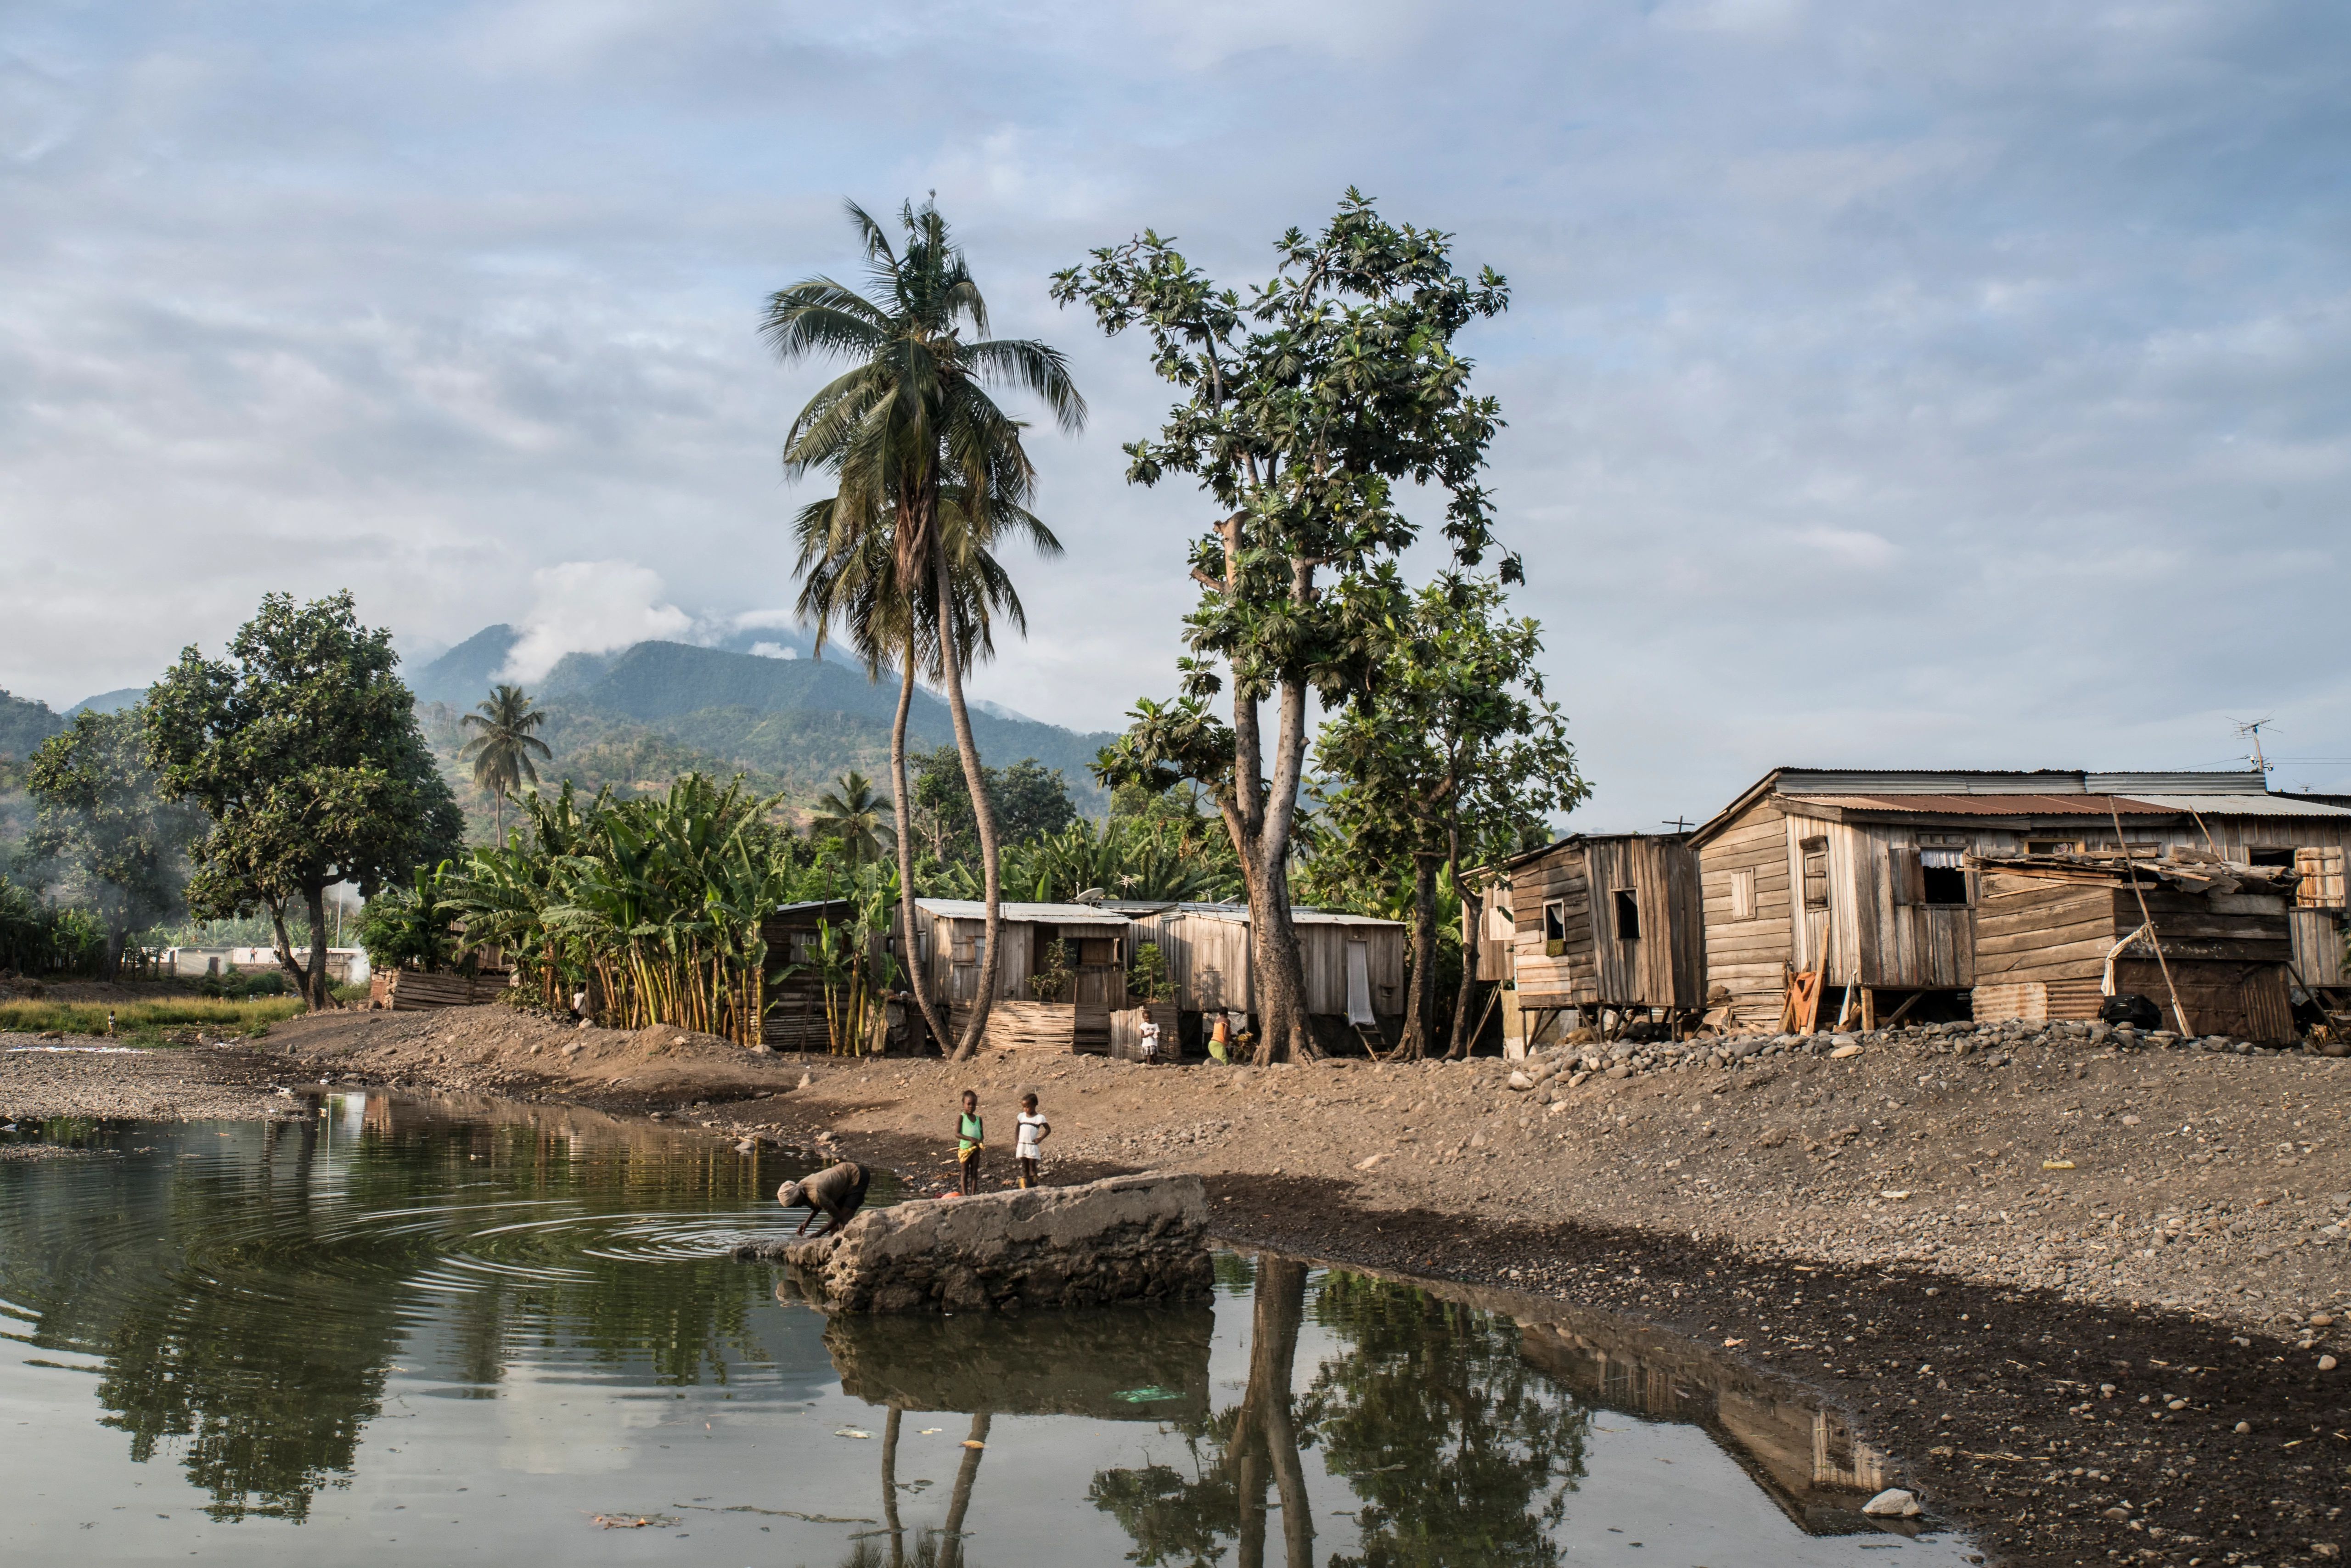 Climate-vulnerable countries gain resilience through disaster risk finance and insurance